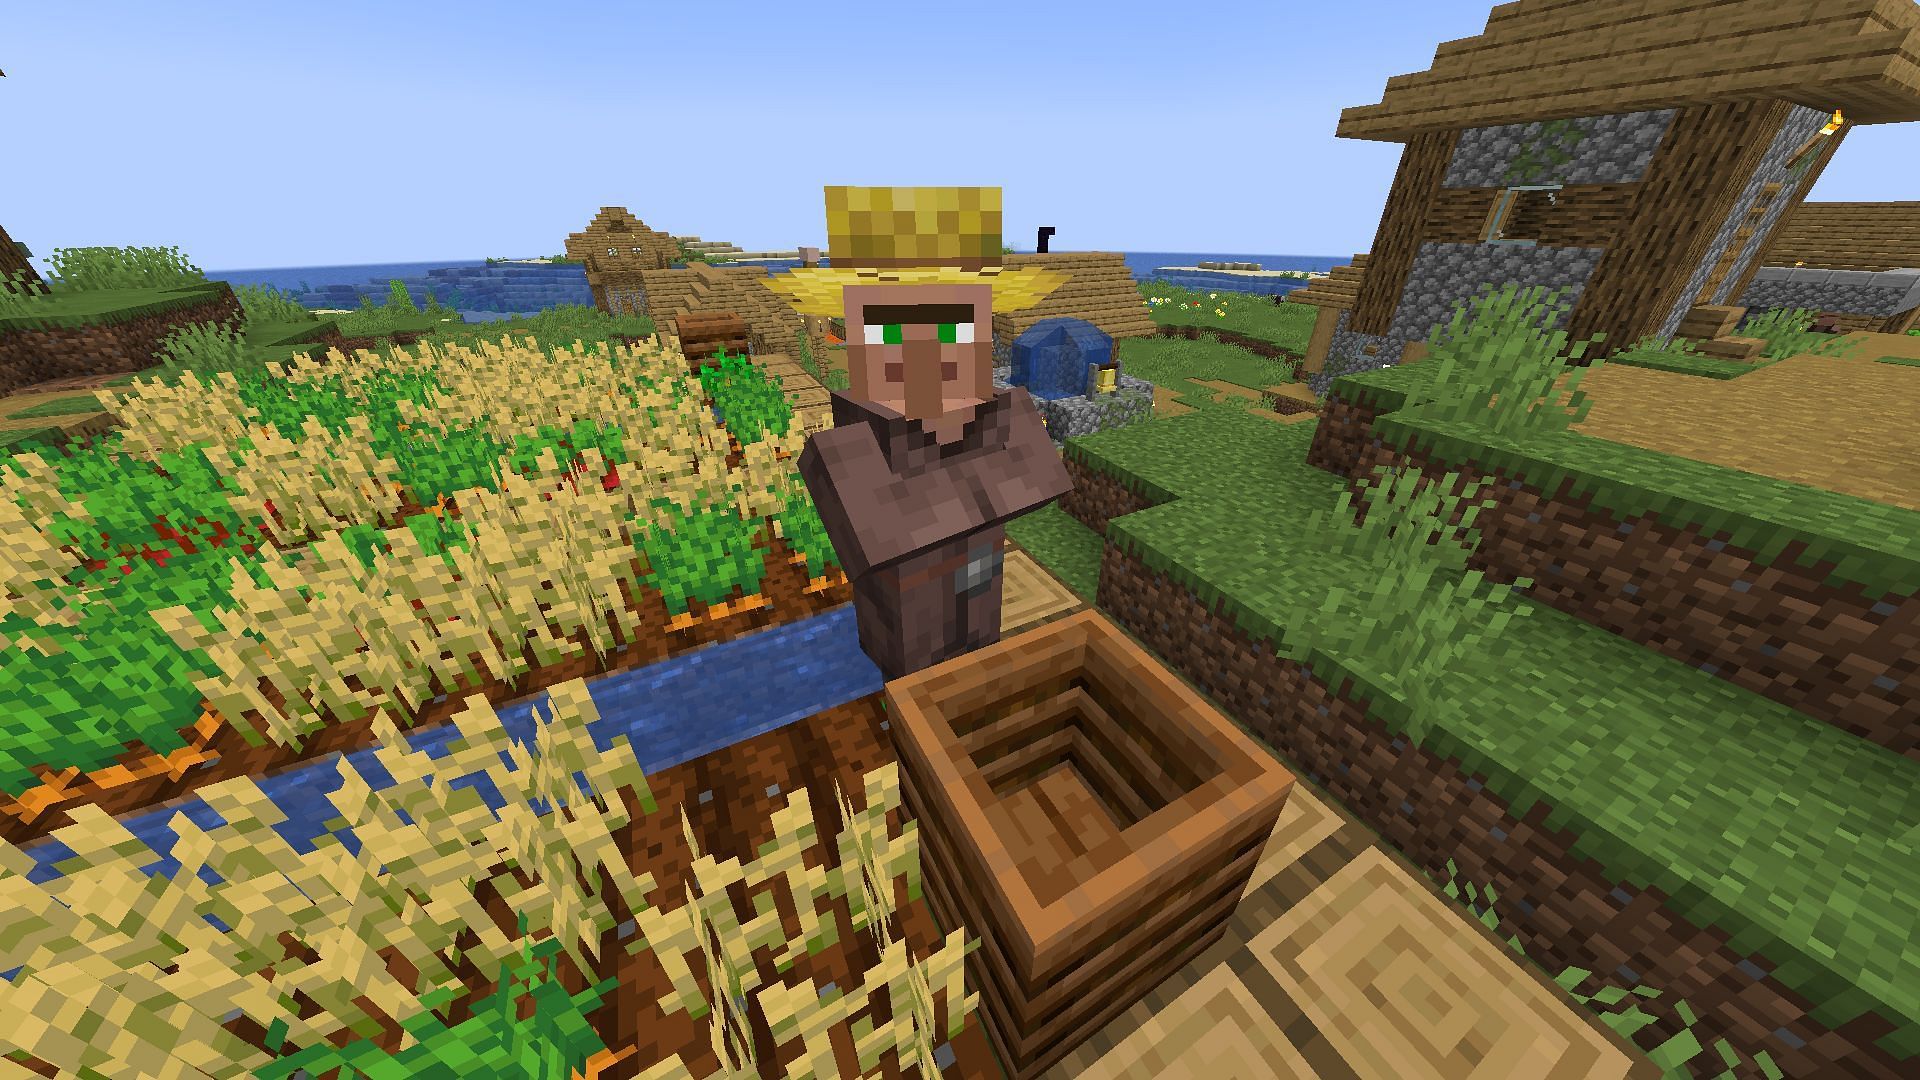 Farmers can give emeralds for wheat in Minecraft (Image via Mojang)